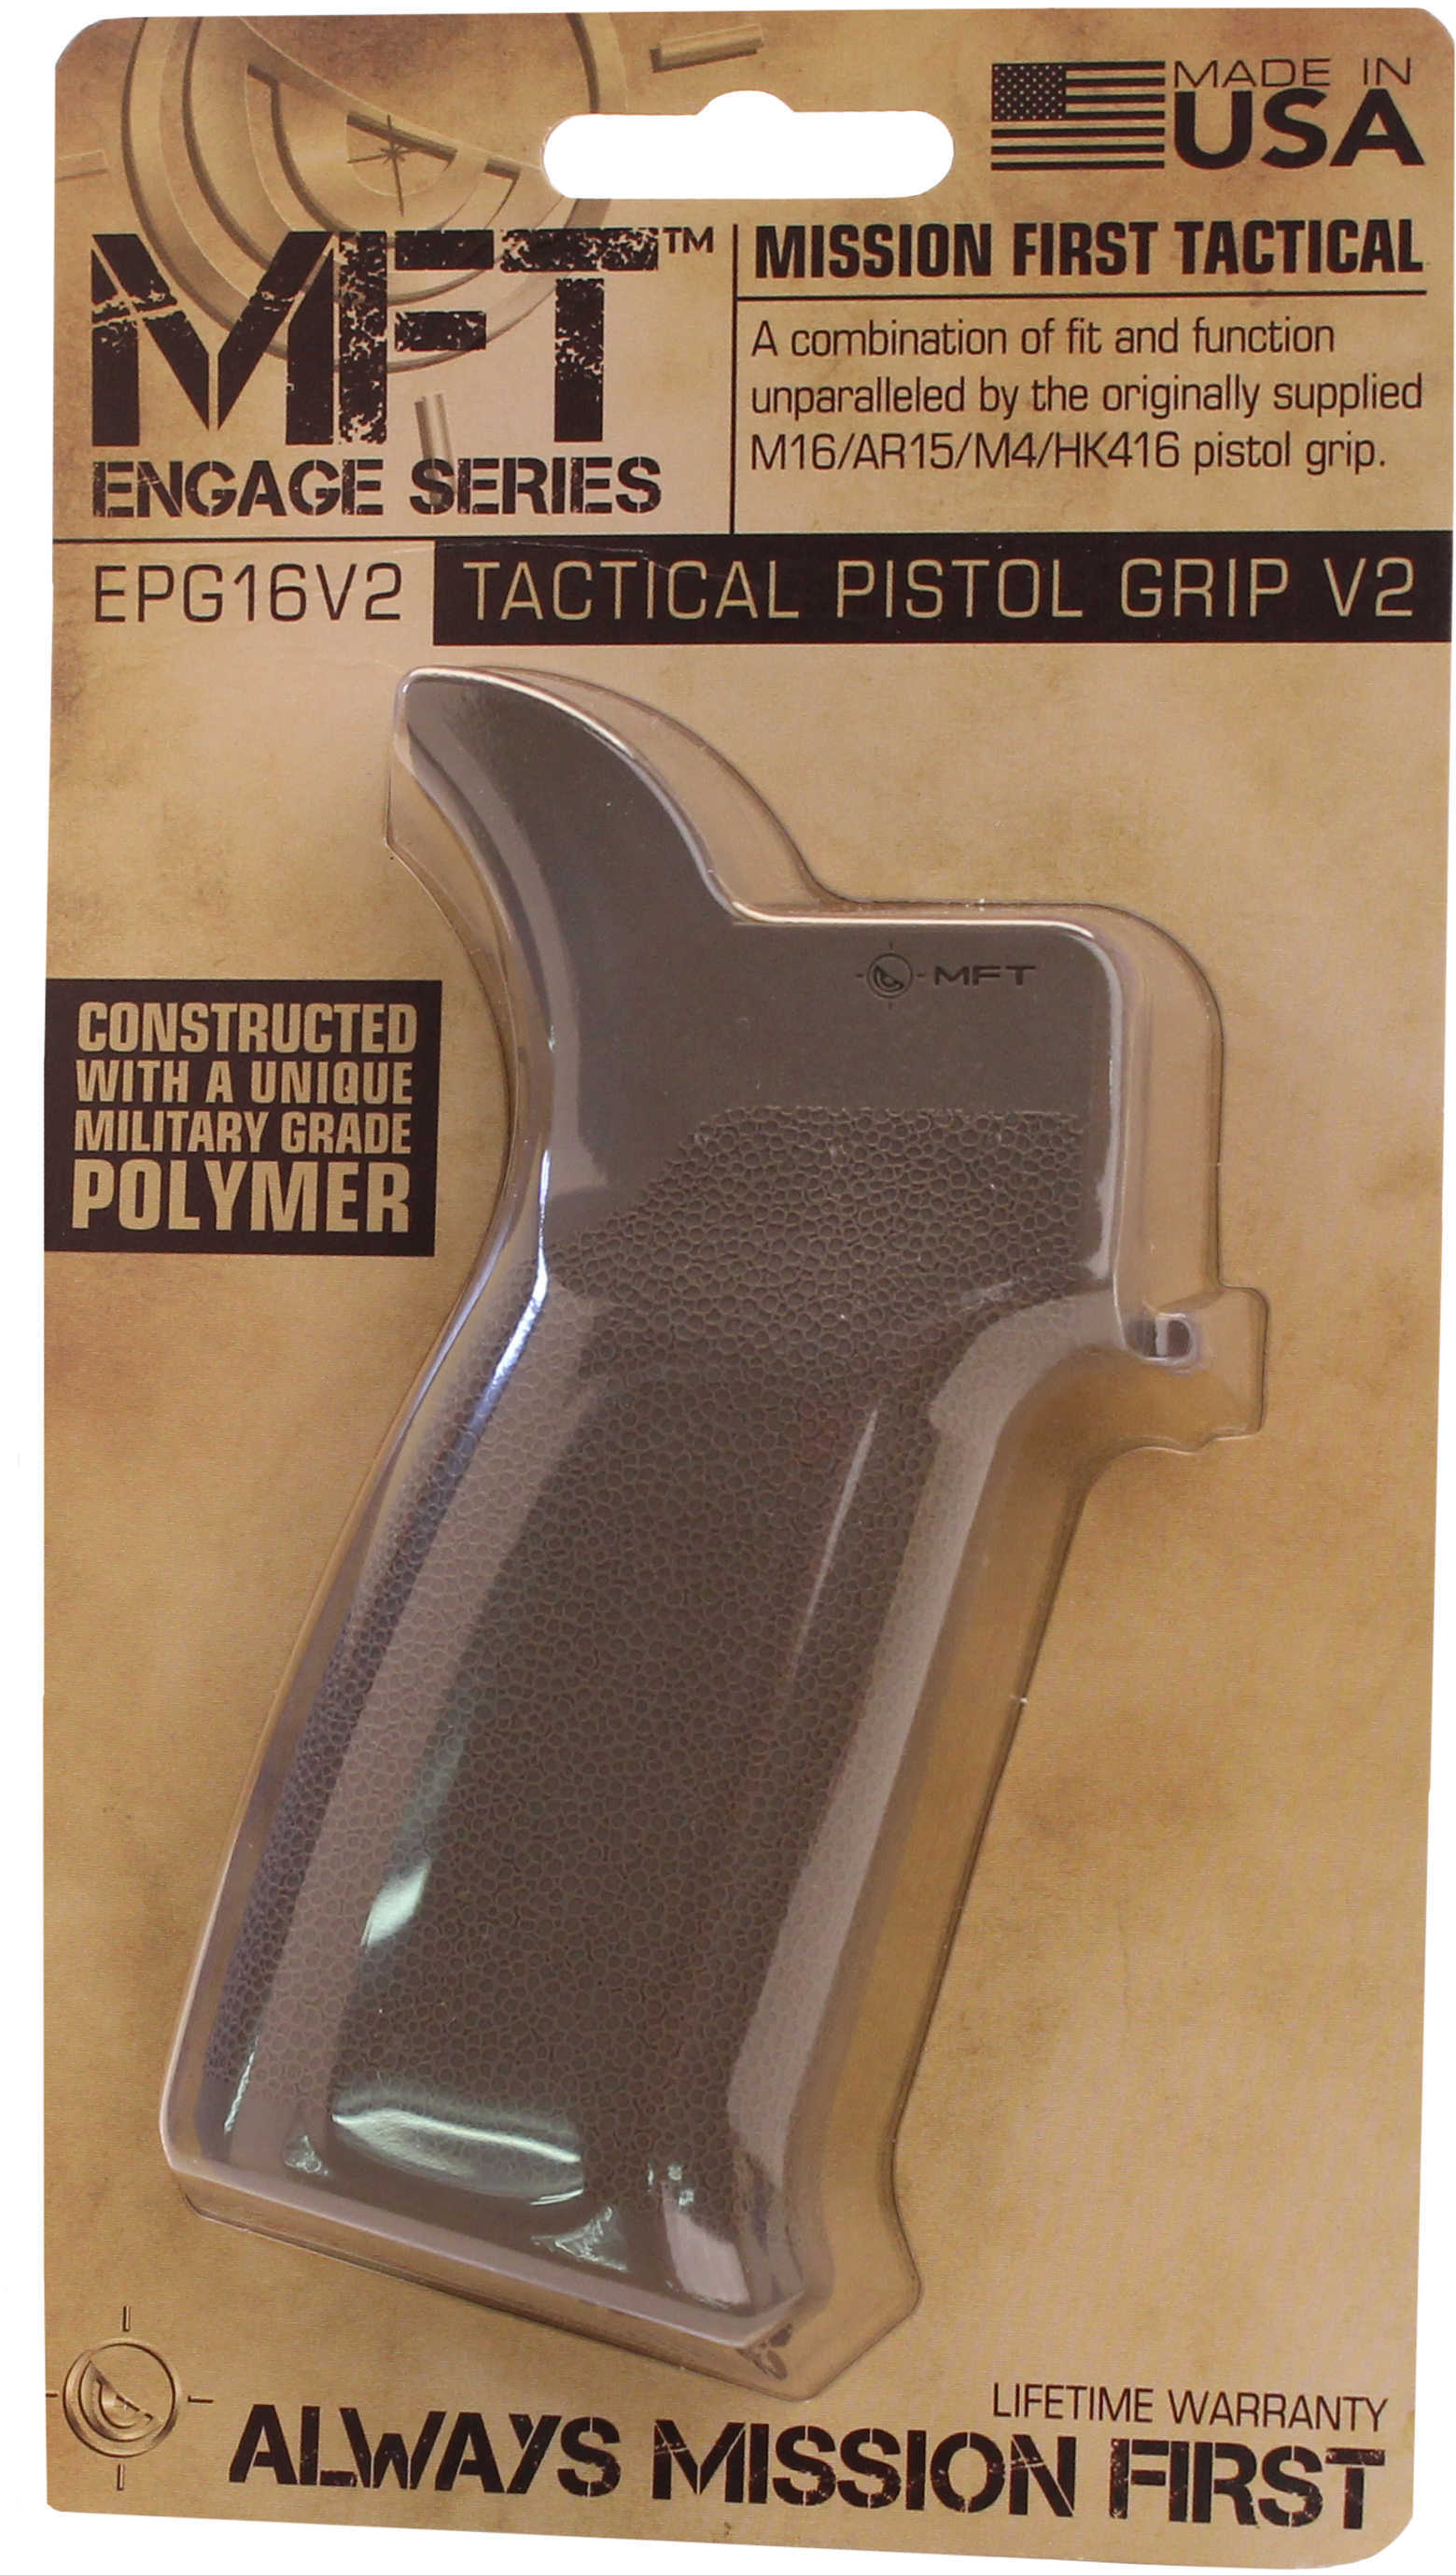 Mission First Tactical Engage Grip Scorched Dark Earth Pistol AR-15/M16 w/15 degree angle and no finger grooves EPG